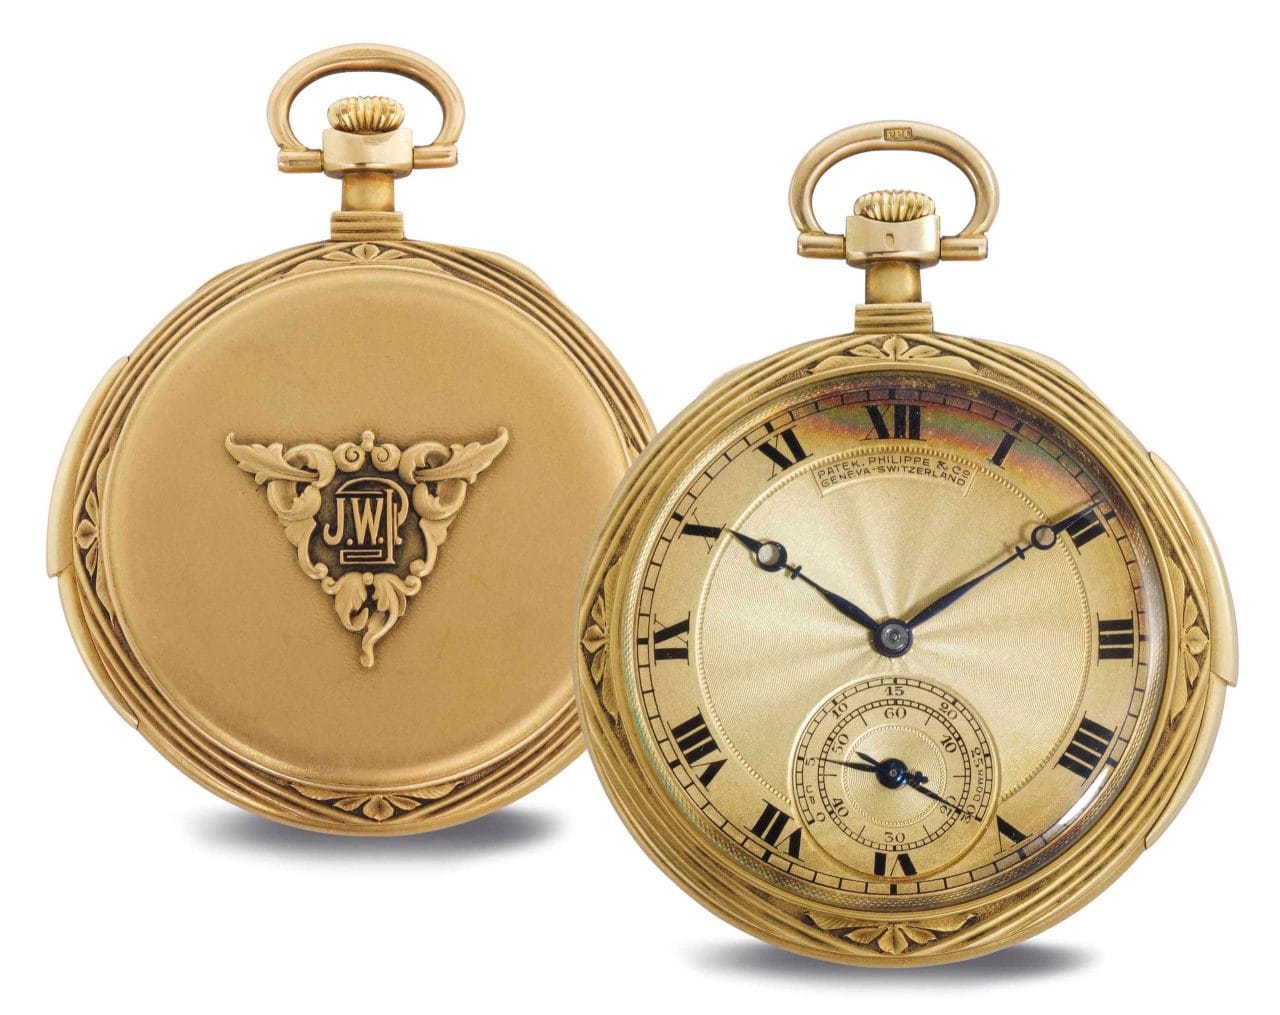 2011_NYR_02453_0099_000(patek_philippe_an_extremely_fine_and_unique_18k_gold_openface_minute_r124332)